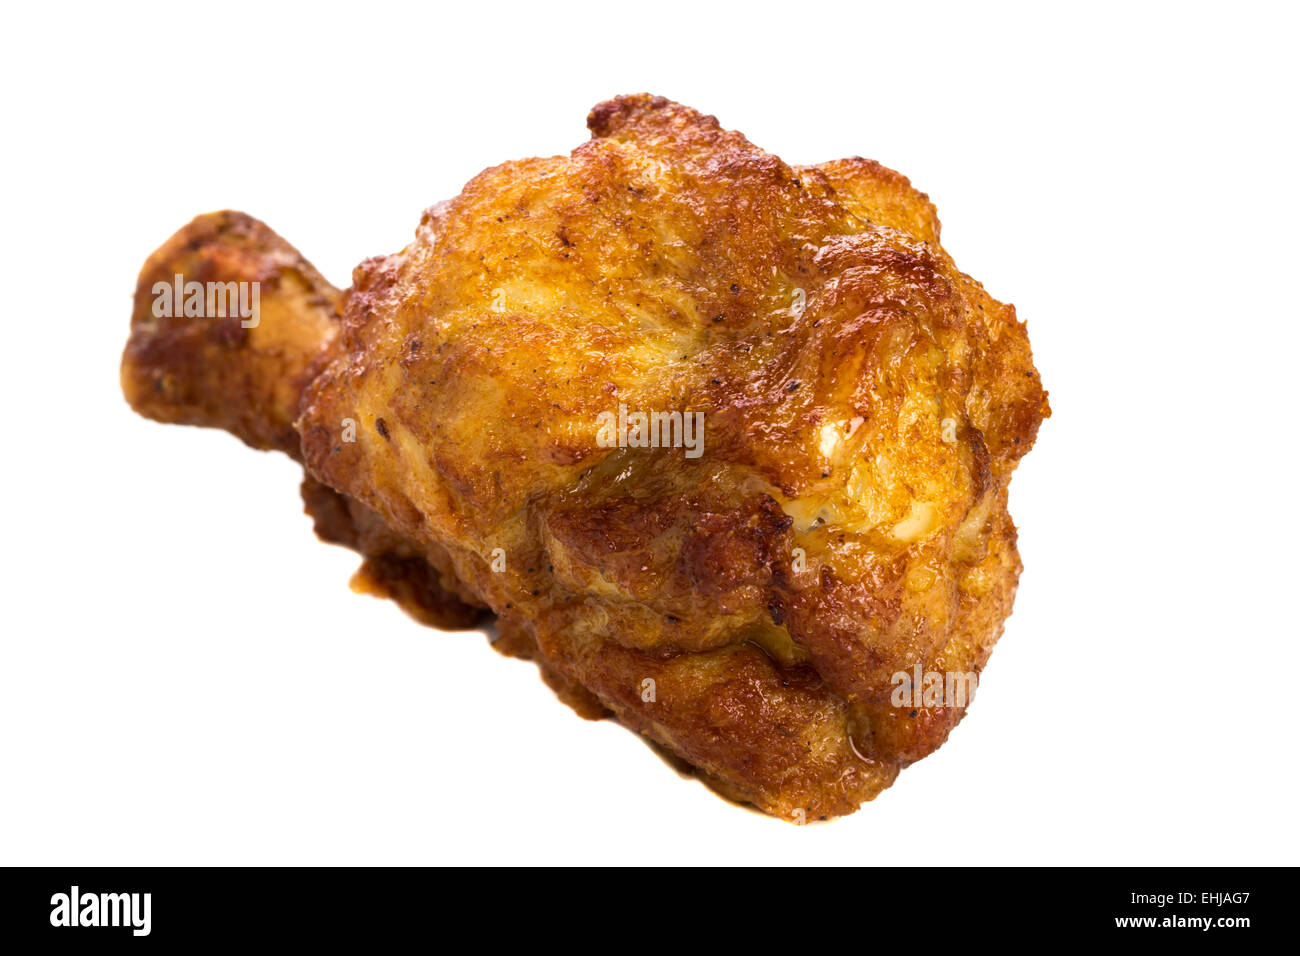 Golden brown fried chicken drumsticks isolated over white background Stock Photo